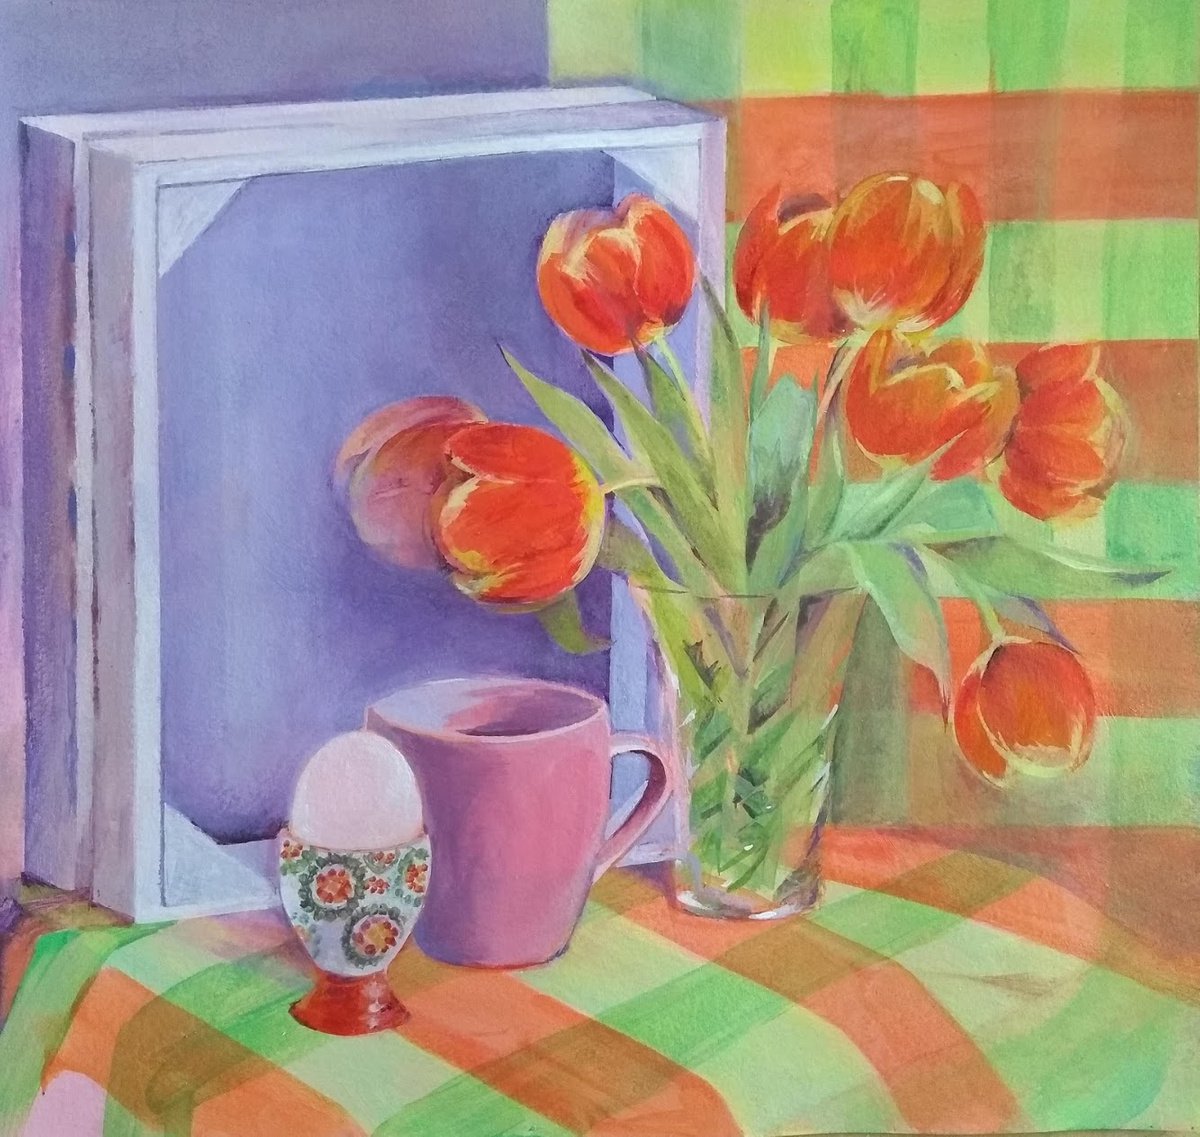 Tulips, tea and dotted egg cup, Still-life an original acrylic painting by Anjana Cawdell